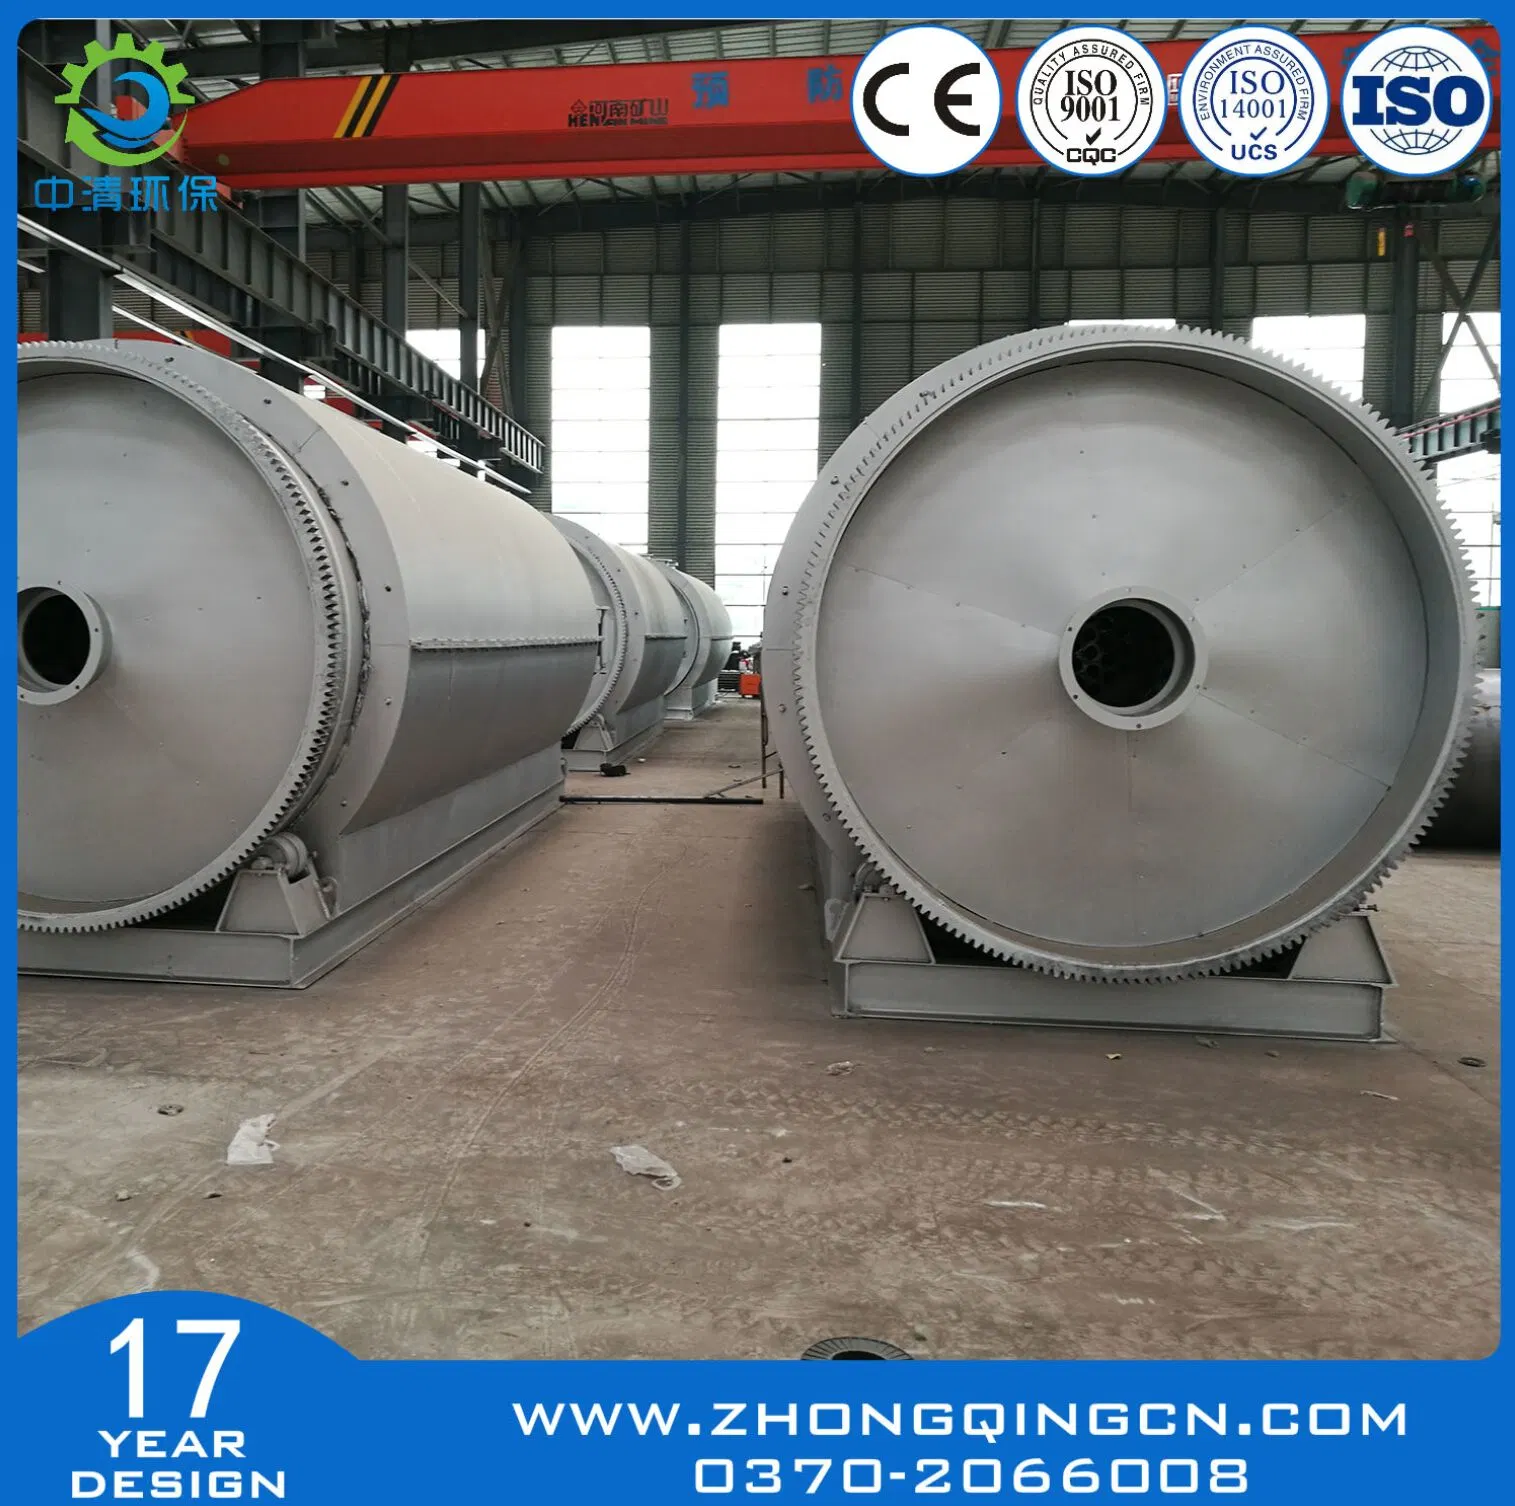 Waste Plastics/Waste Rubber/Waste Tires Pyrolysis Plant/Recycling Plant/Waste Treatment Equipment to Gasoline with CE, SGS, ISO, BV